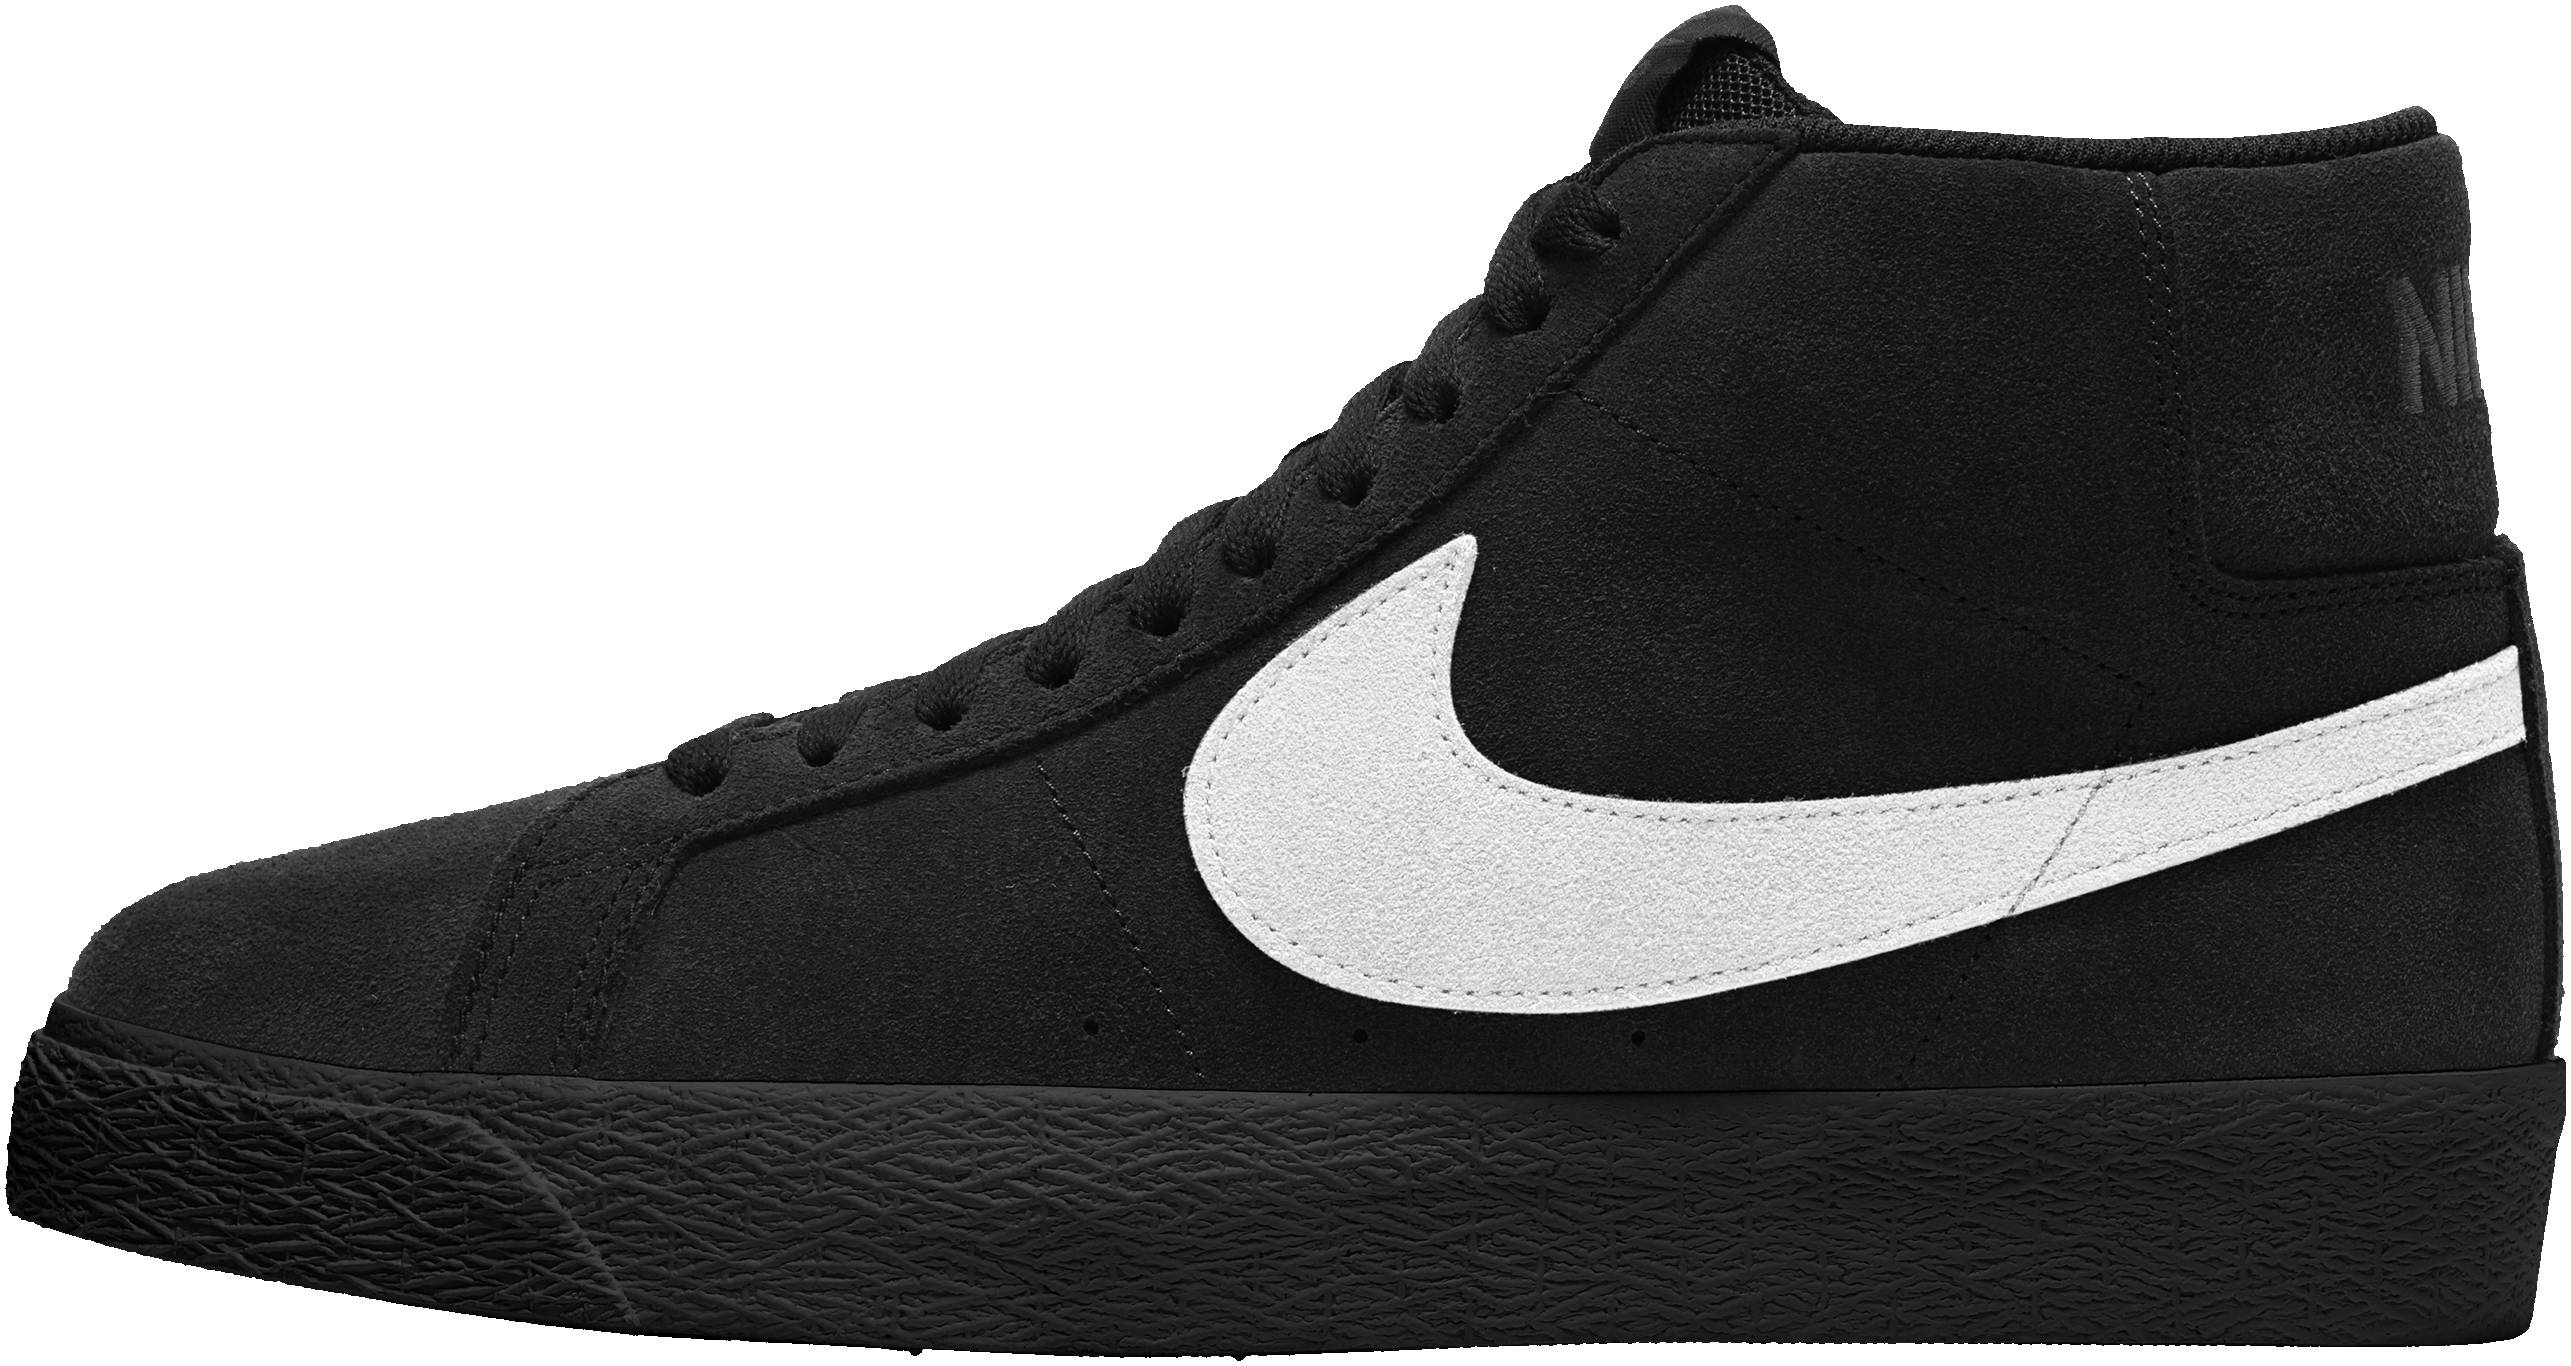 Indulge feather Deserve Nike SB Blazer Mid sneakers in 10+ colors (only $52) | RunRepeat